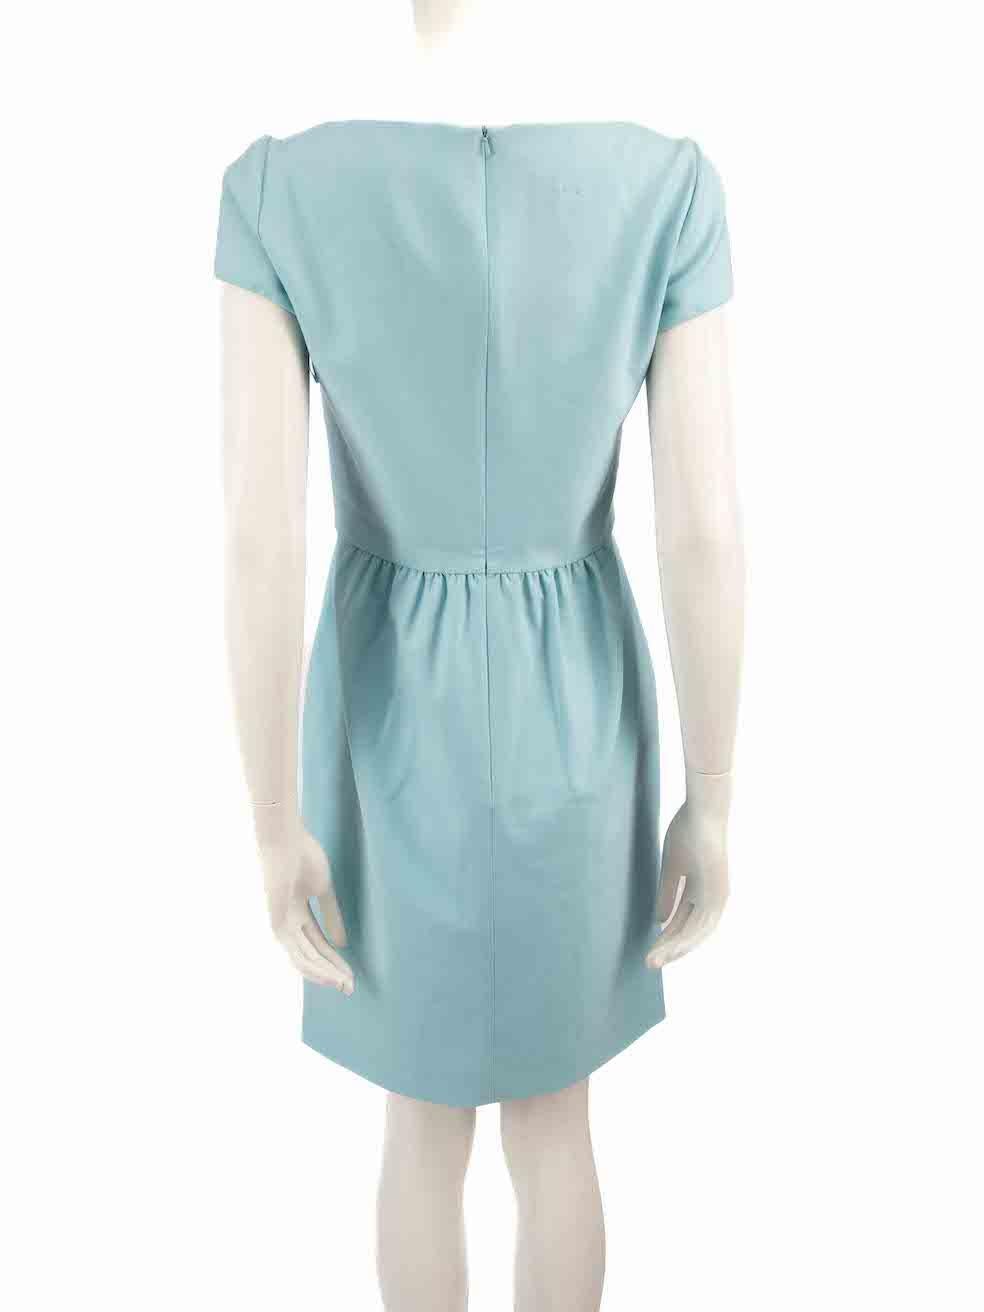 Moschino Blue Sweetheart Neckline Mini Dress Size M In Excellent Condition For Sale In London, GB